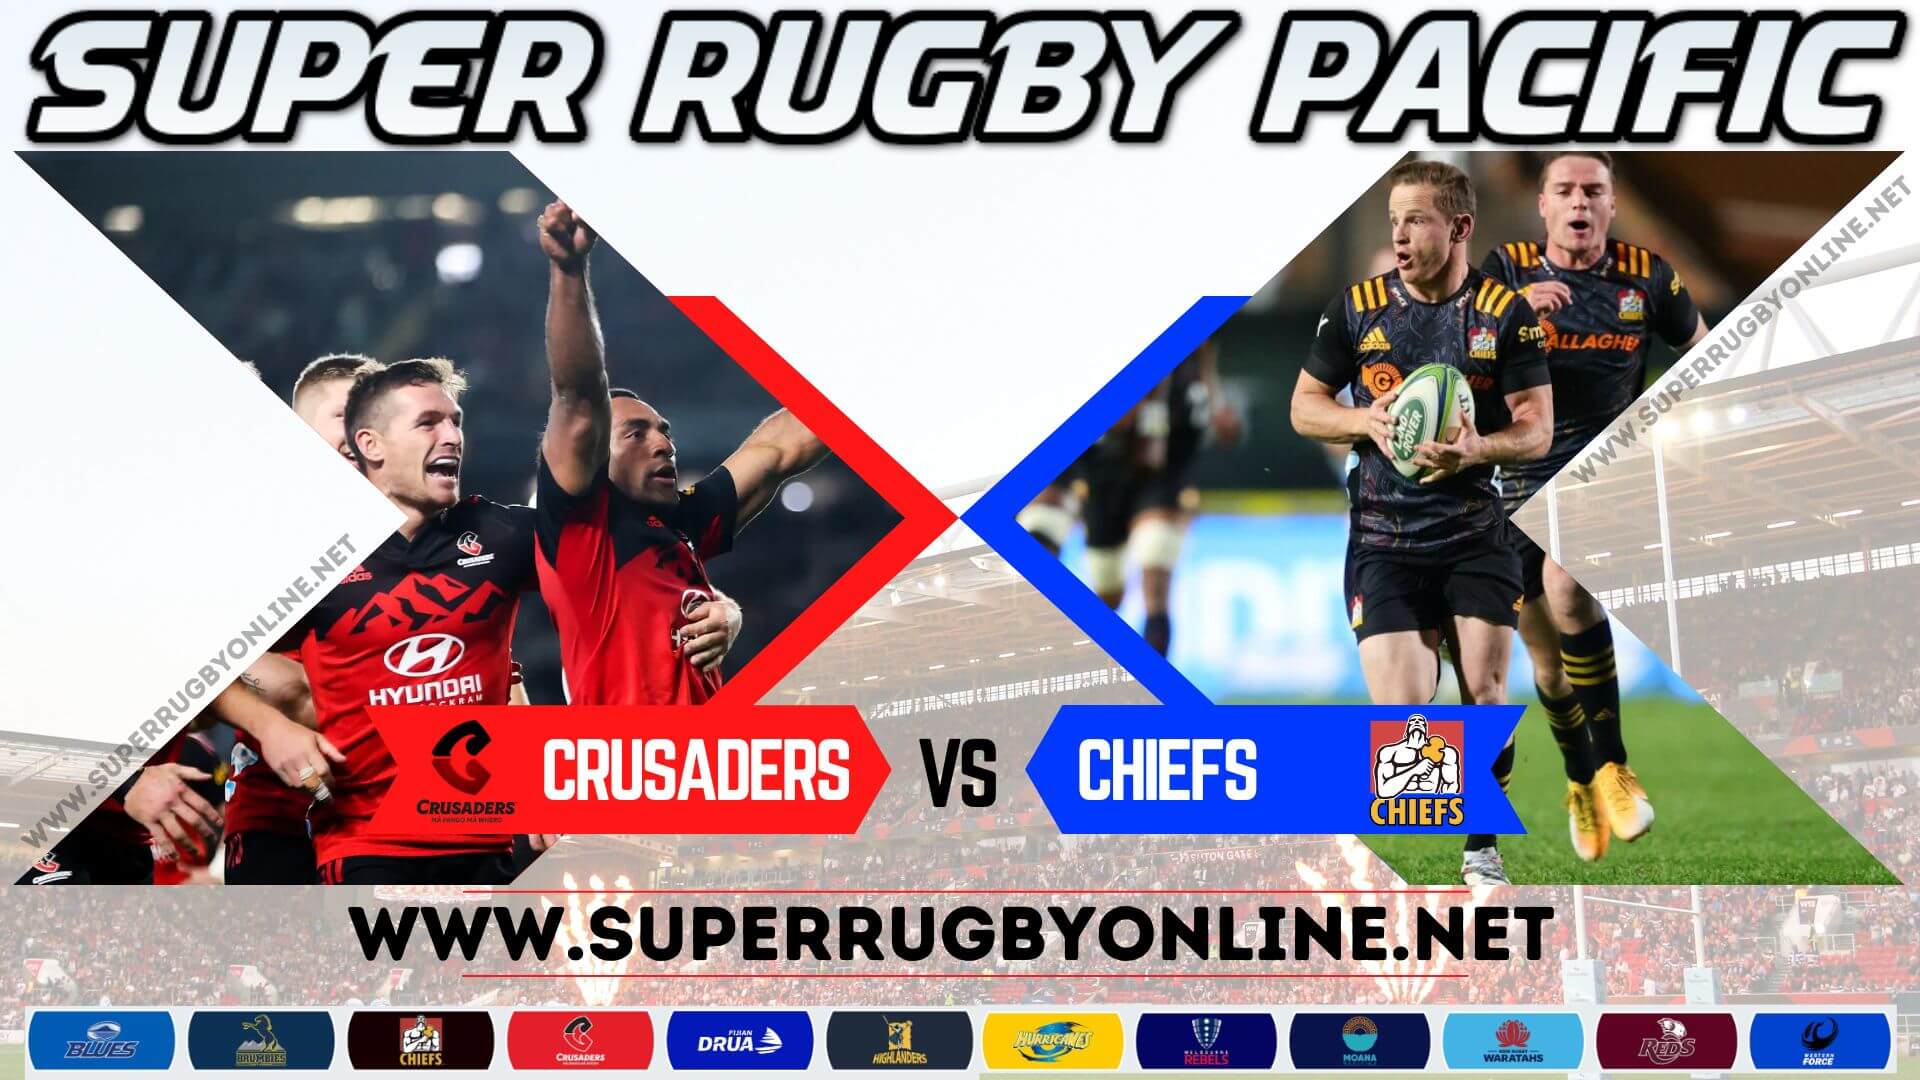 Crusaders Vs Chiefs Super Rugby Live Stream